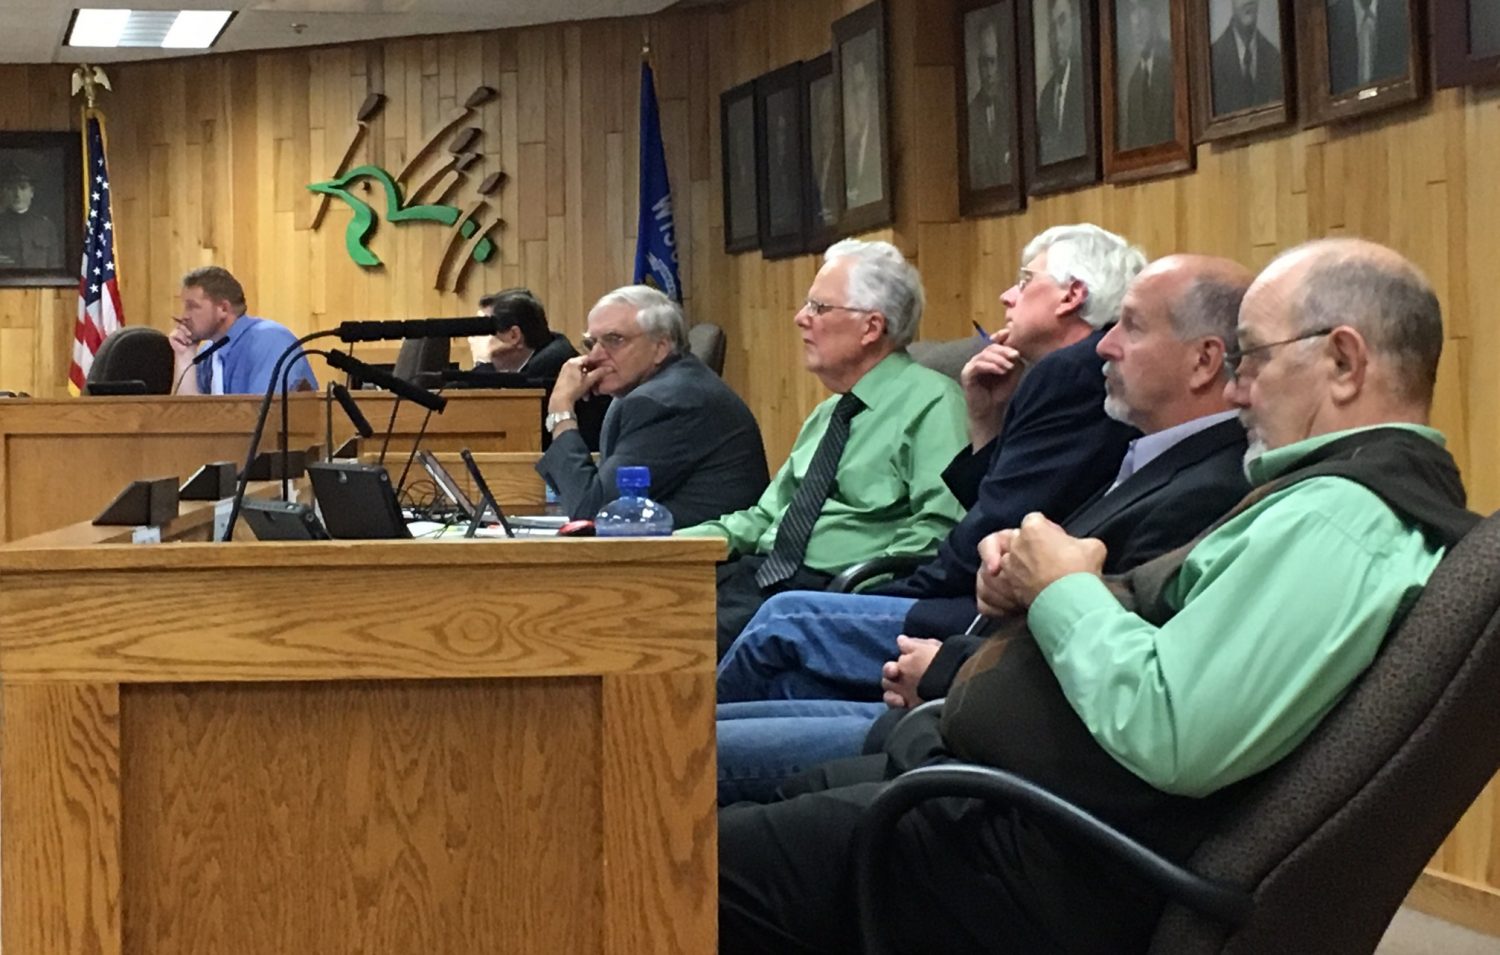 Marshfield Common Council members listen to discussion during the Oct. 10 regular meeting. The council gave cable television coordinator Tri-Media three days to obtain needed liability insurance to allow pulled Marshfield Community Television programs to continue airing.